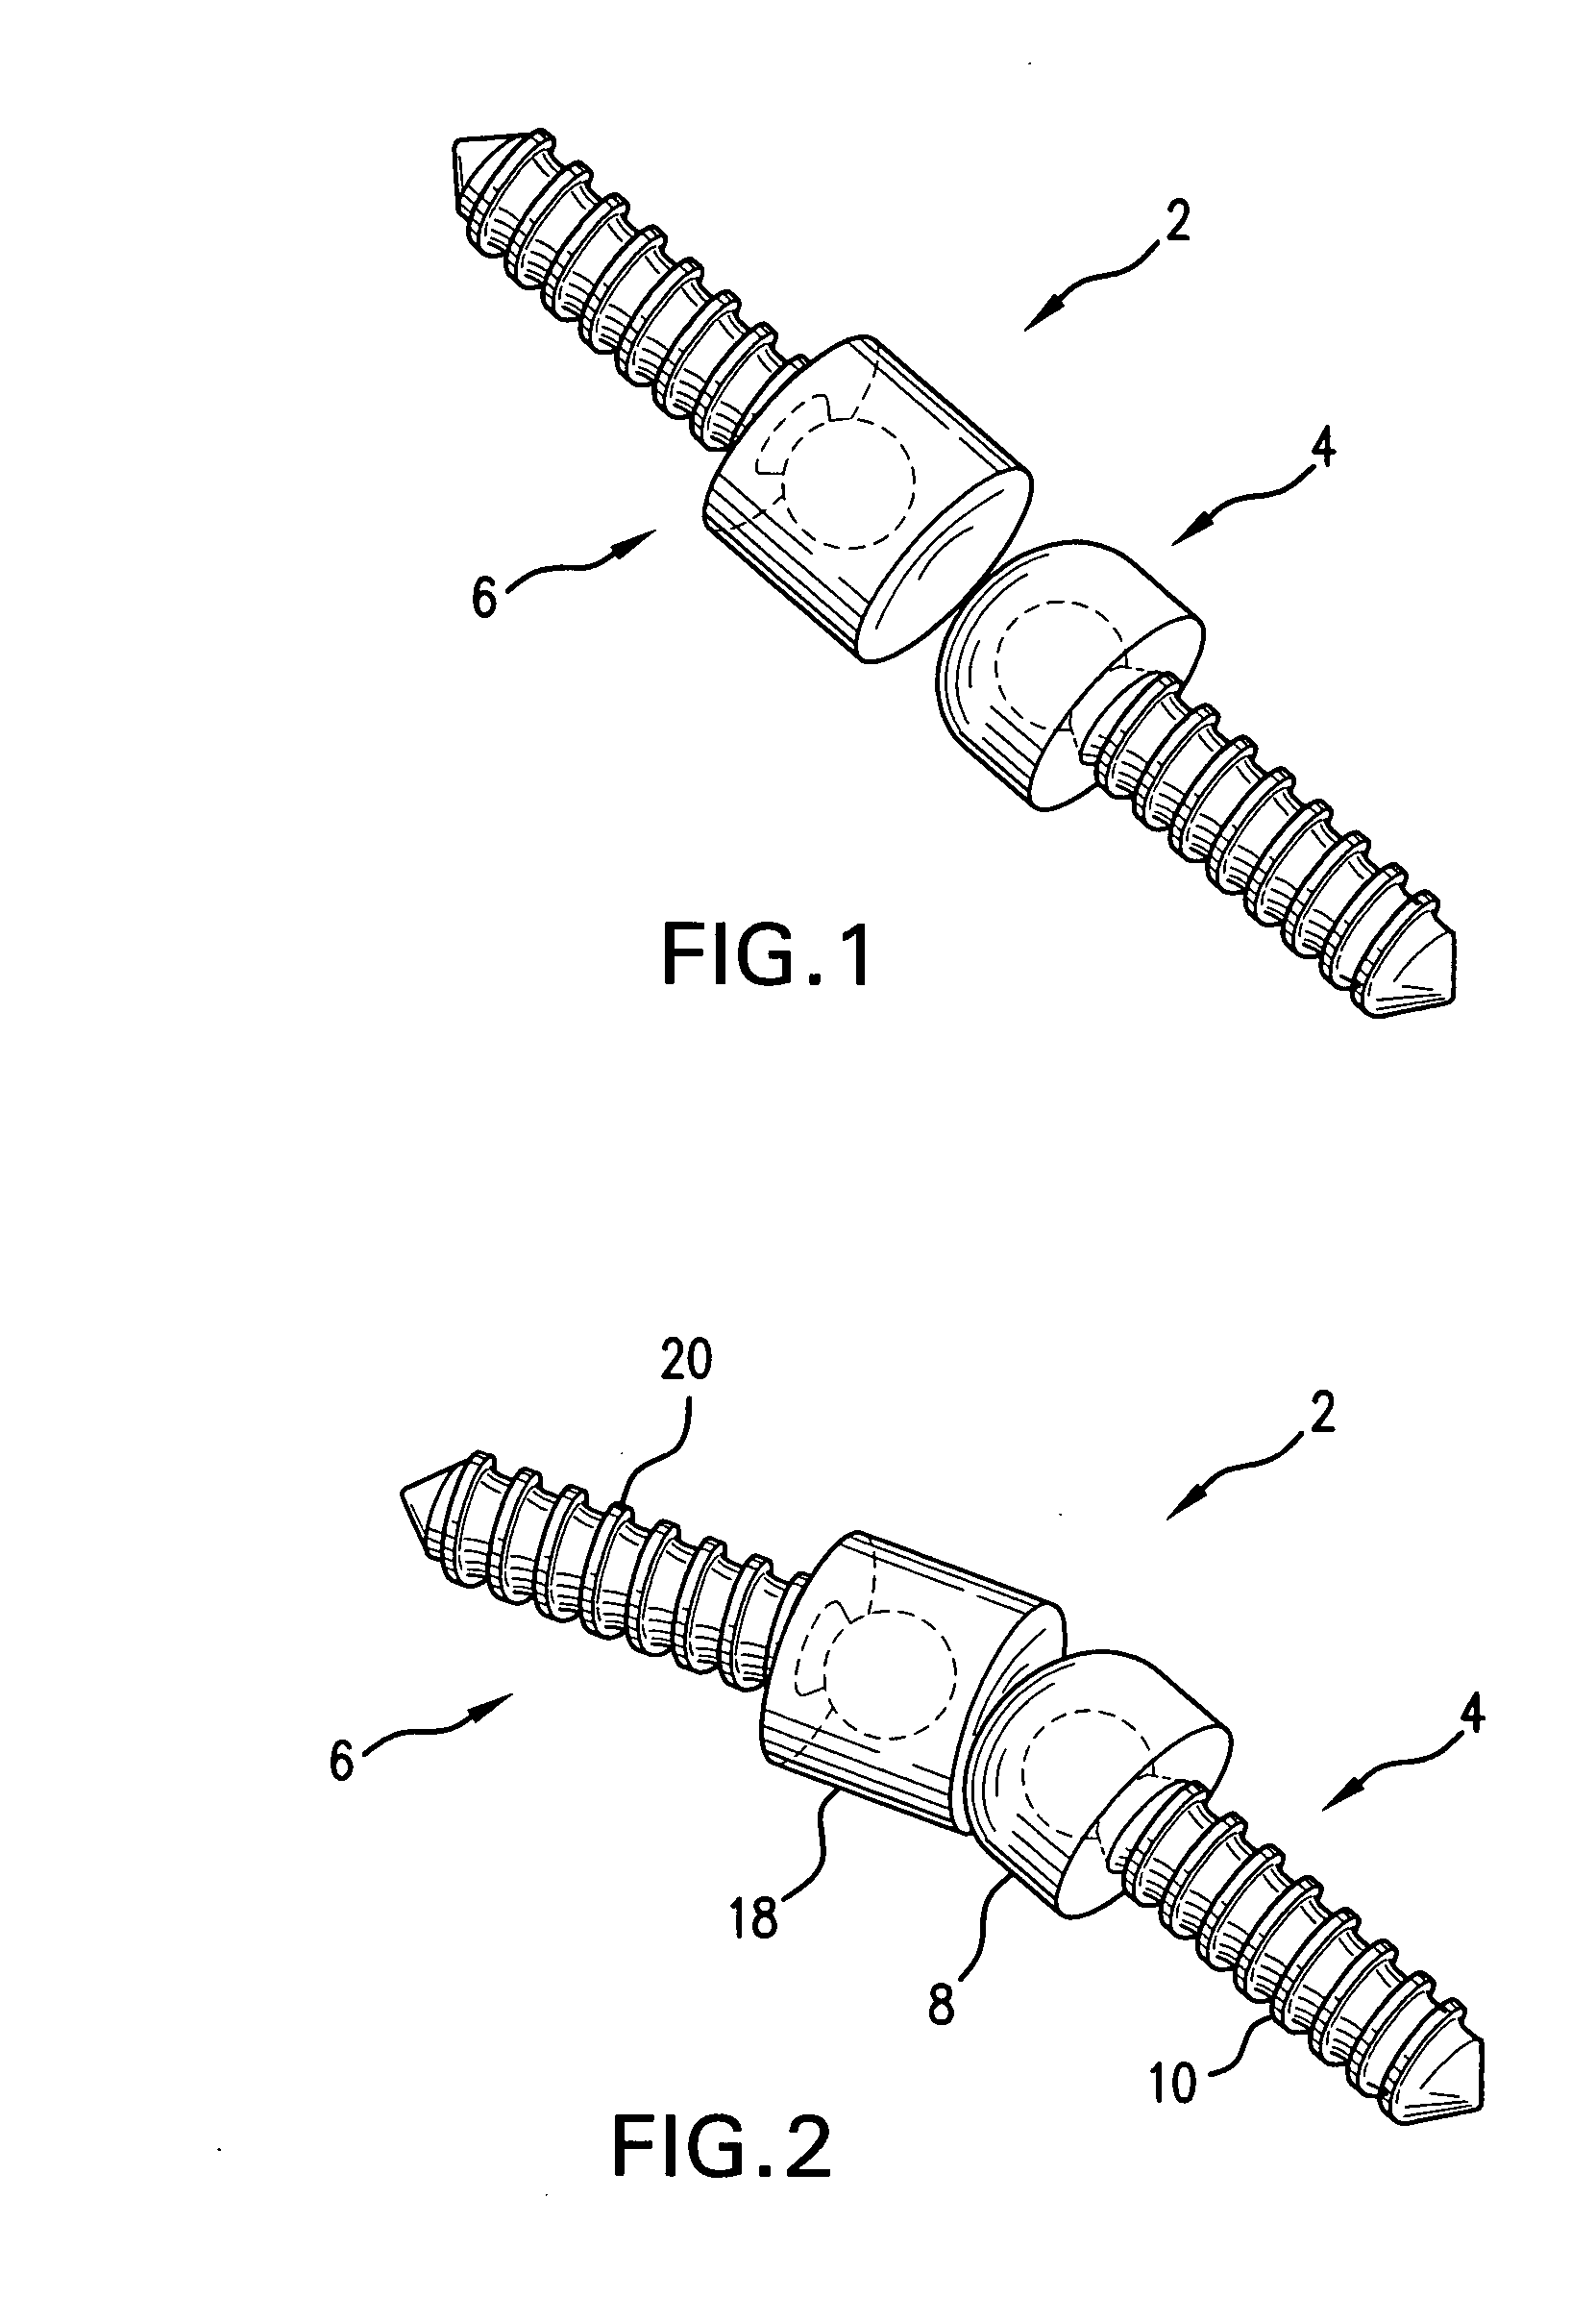 Modular joint replacement implant with hydrogel surface